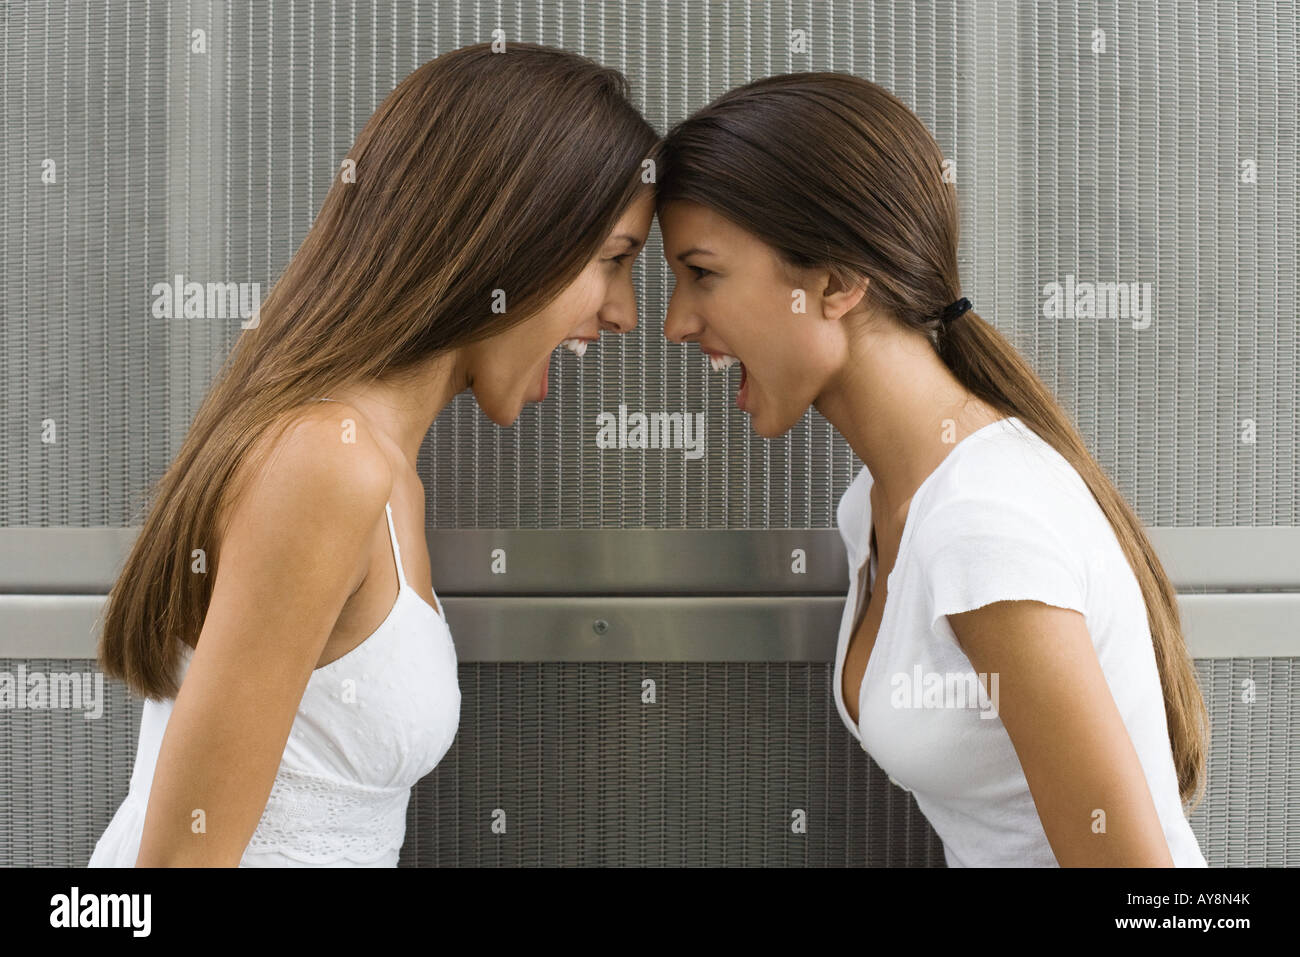 Teenage twin sisters leaning with foreheads touching, both shouting, side view Stock Photo